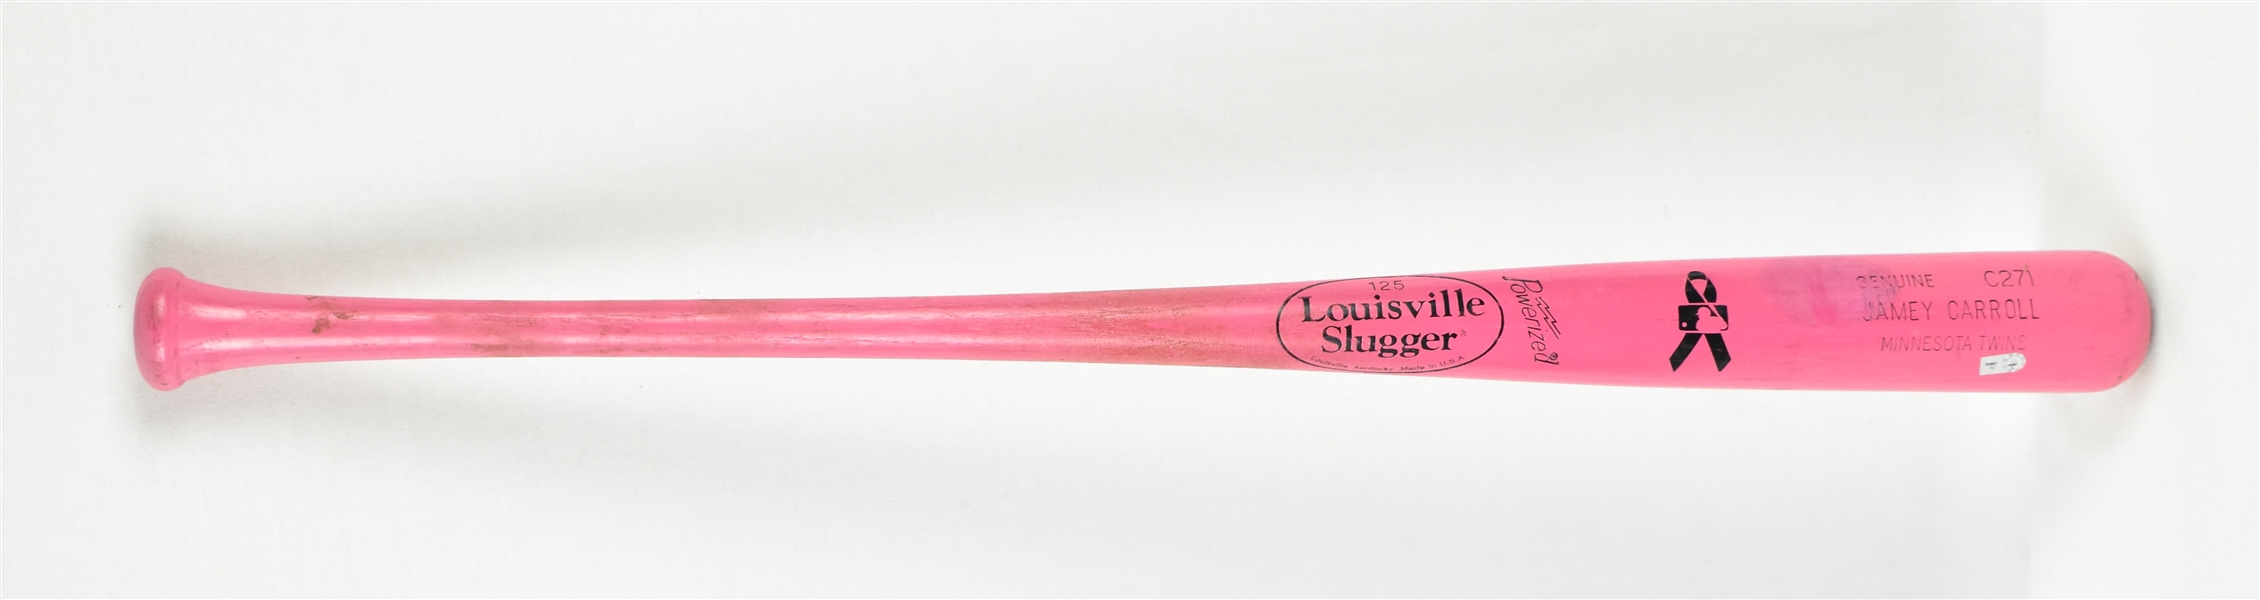 Jamey Carroll 2012 Game Used Mothers Day Bat